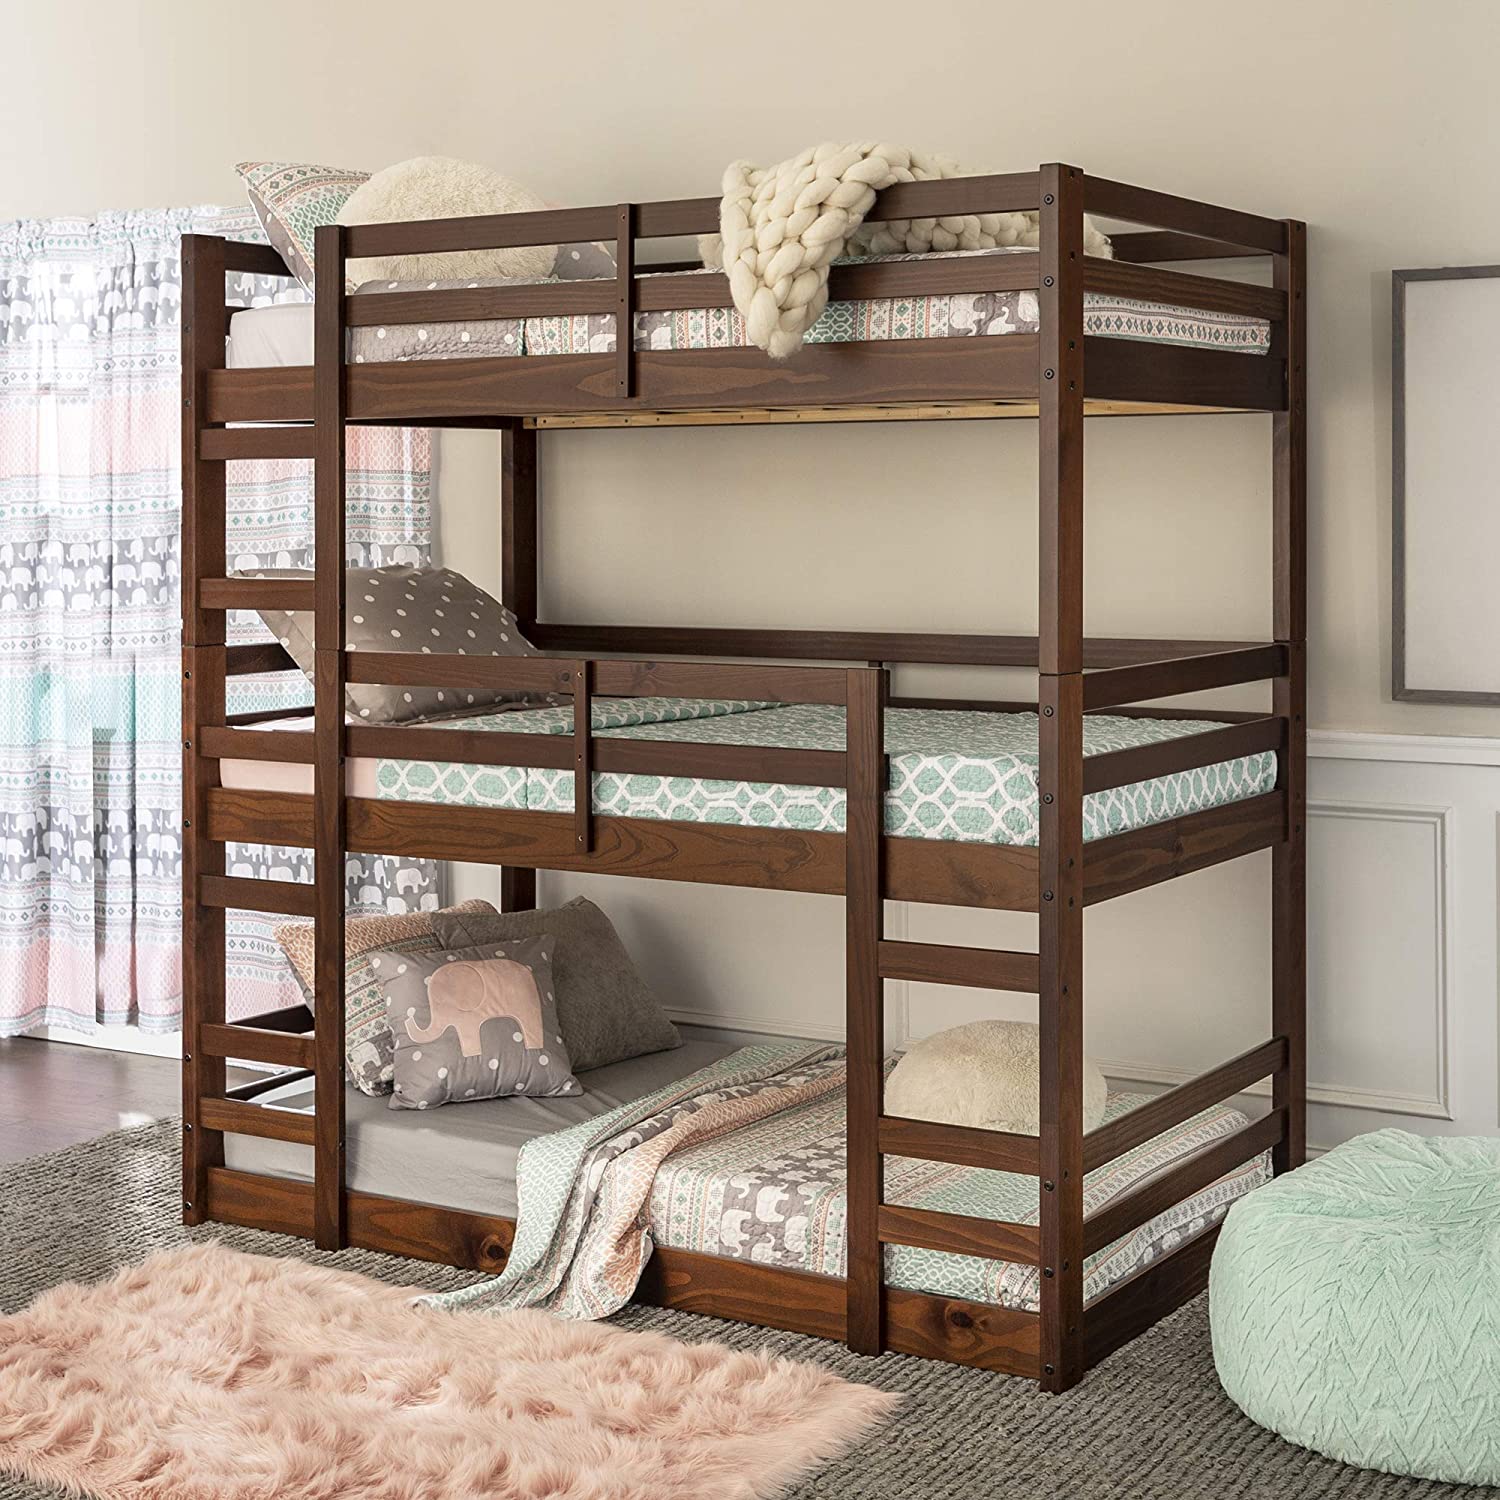 How To Find The Right Bunk Beds For Your Kids